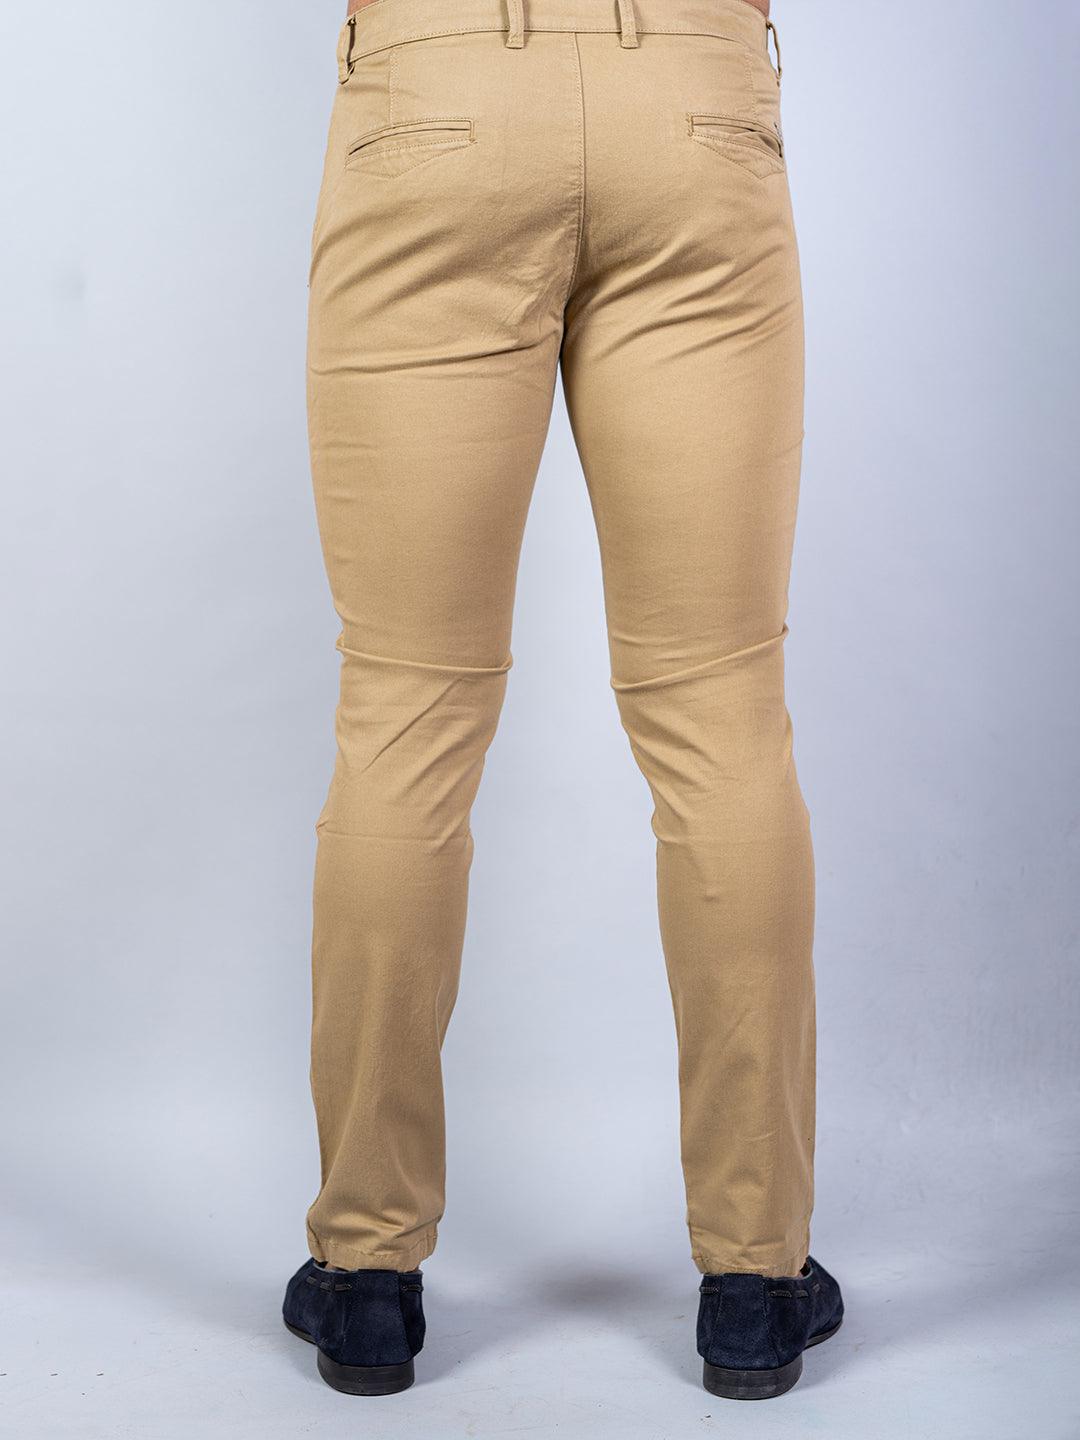 Buy Polo Ralph Lauren Men Beige Slim Fit Featherweight Twill Pant Online   875545  The Collective